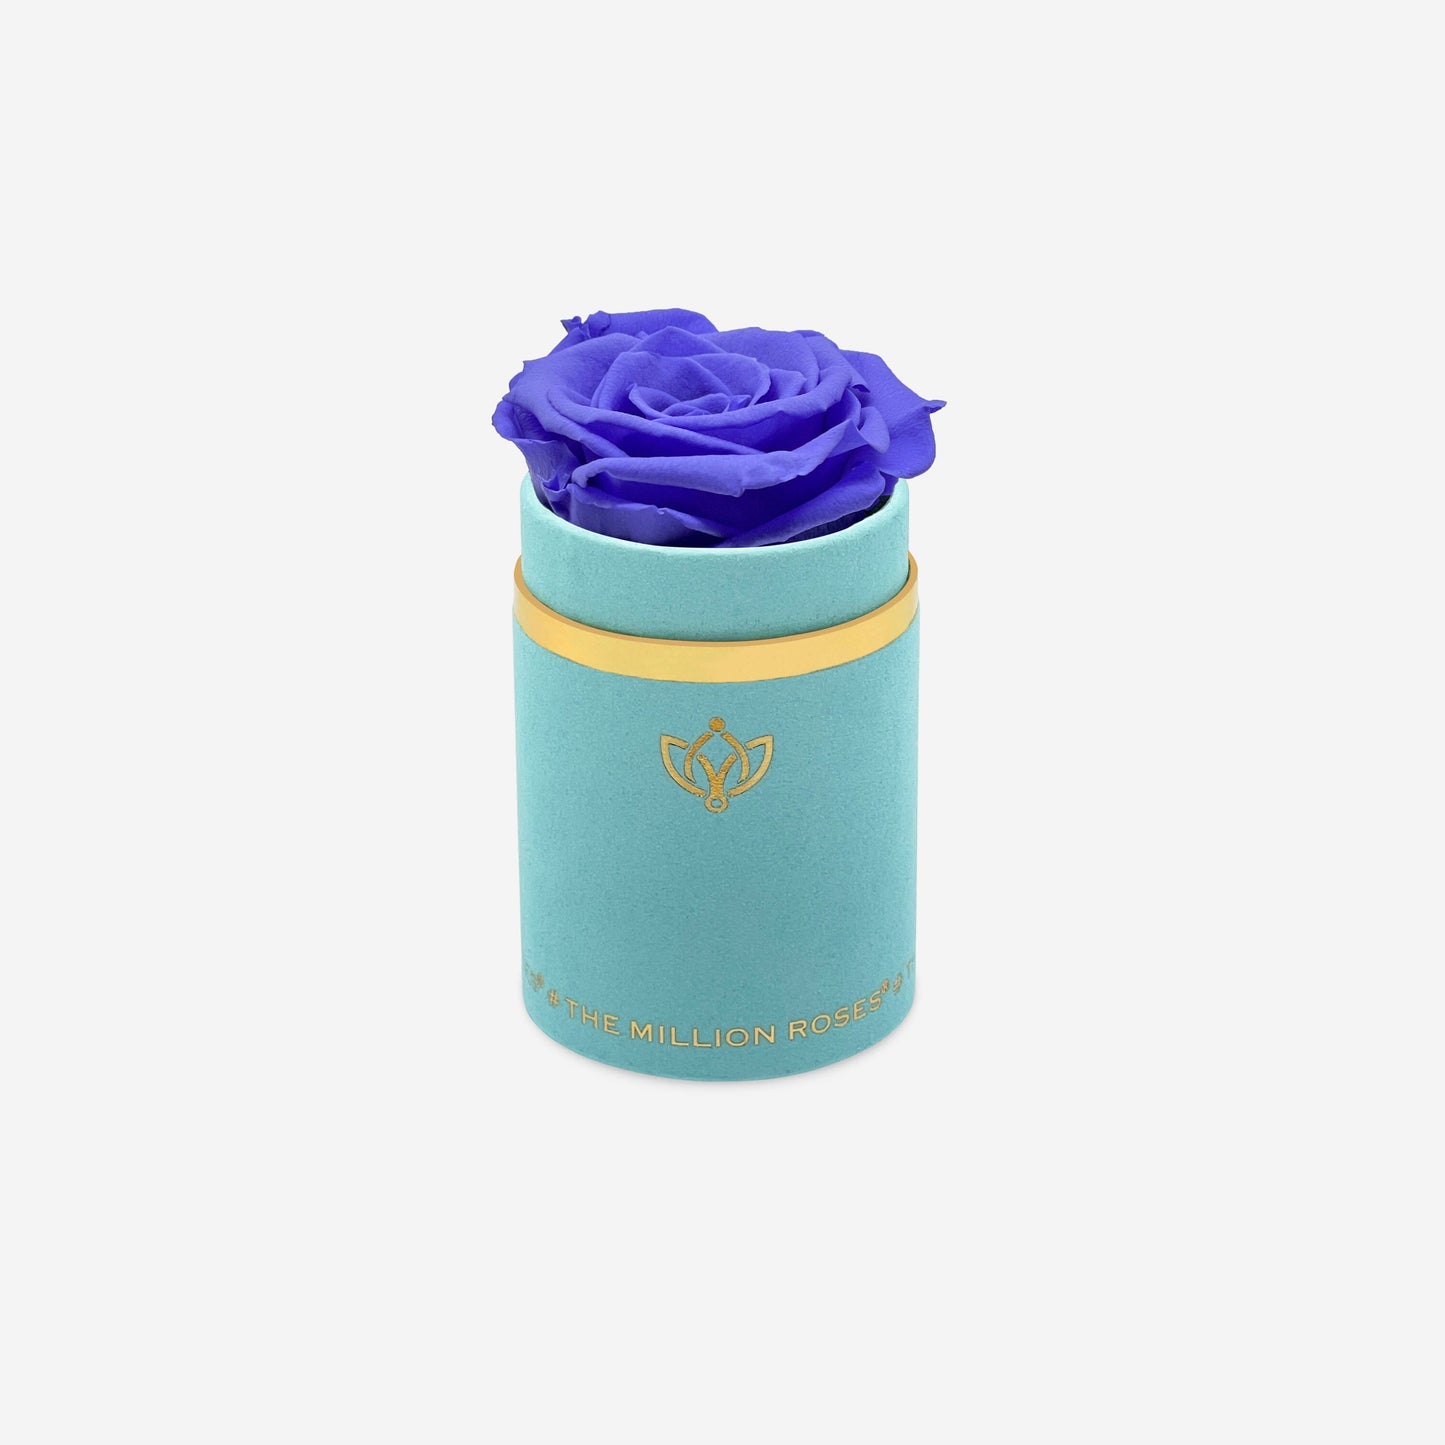 Single Mint Green Suede Box | Violet Rose - The Million Roses